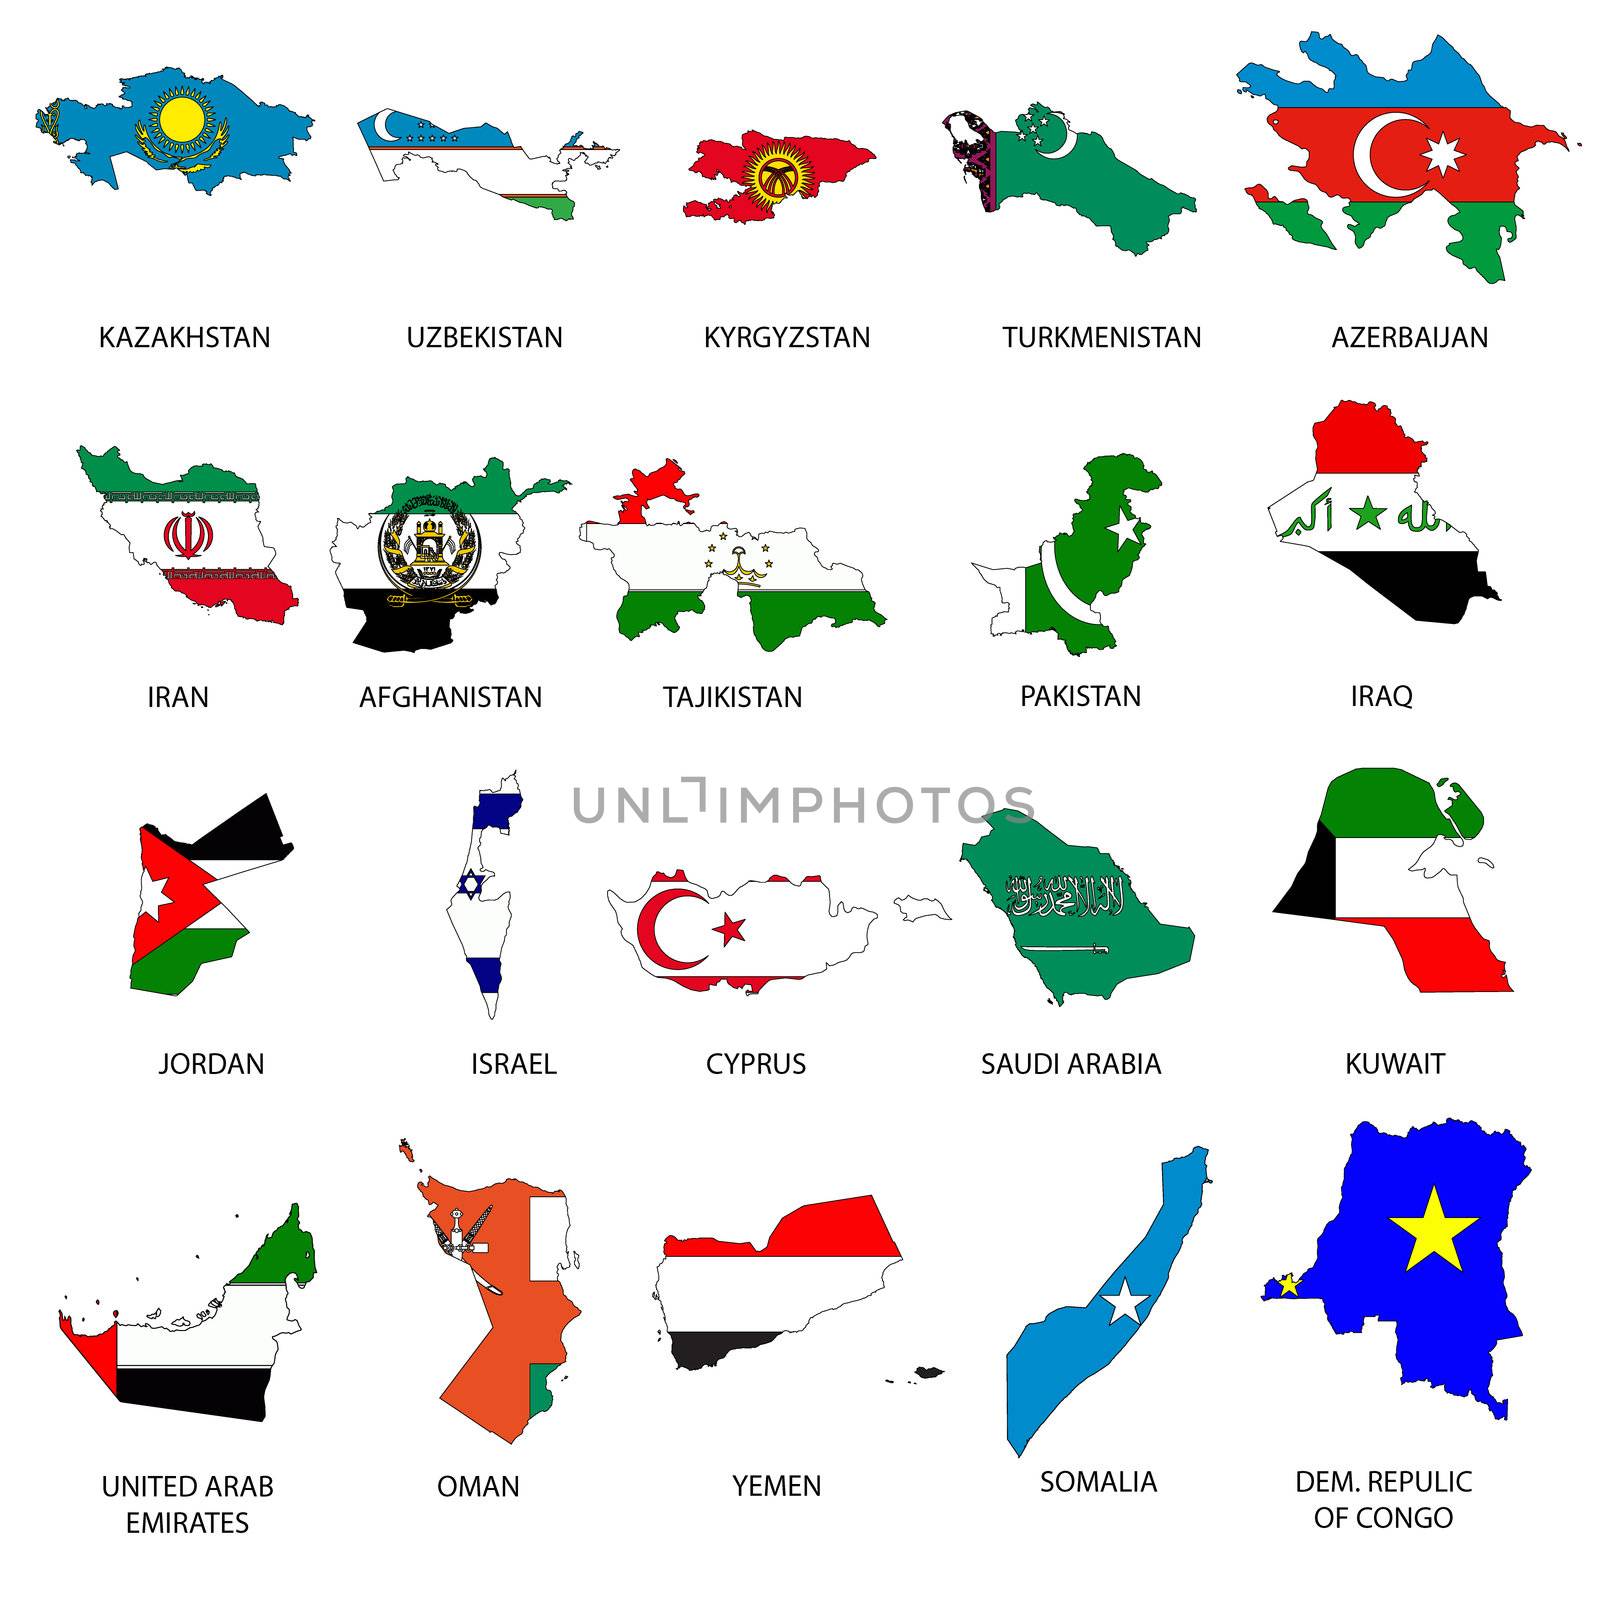 Illustrated Outlines of Countries with Flag inside by DragonEyeMedia